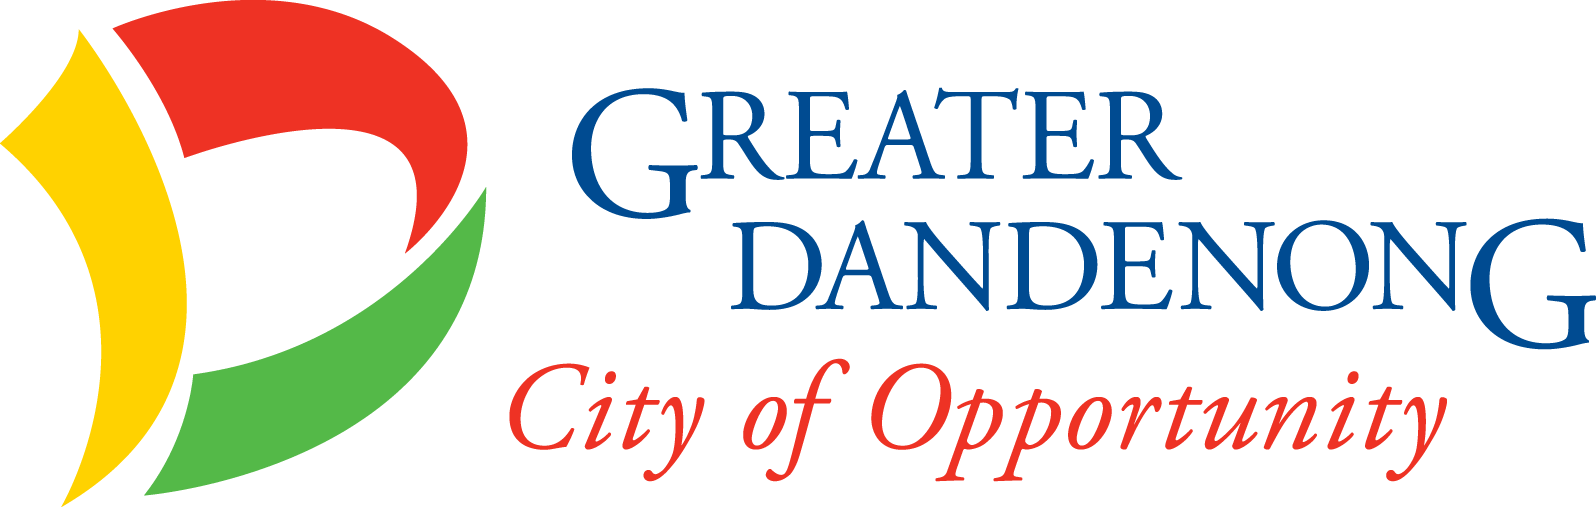 City of Greater Dandenong Council